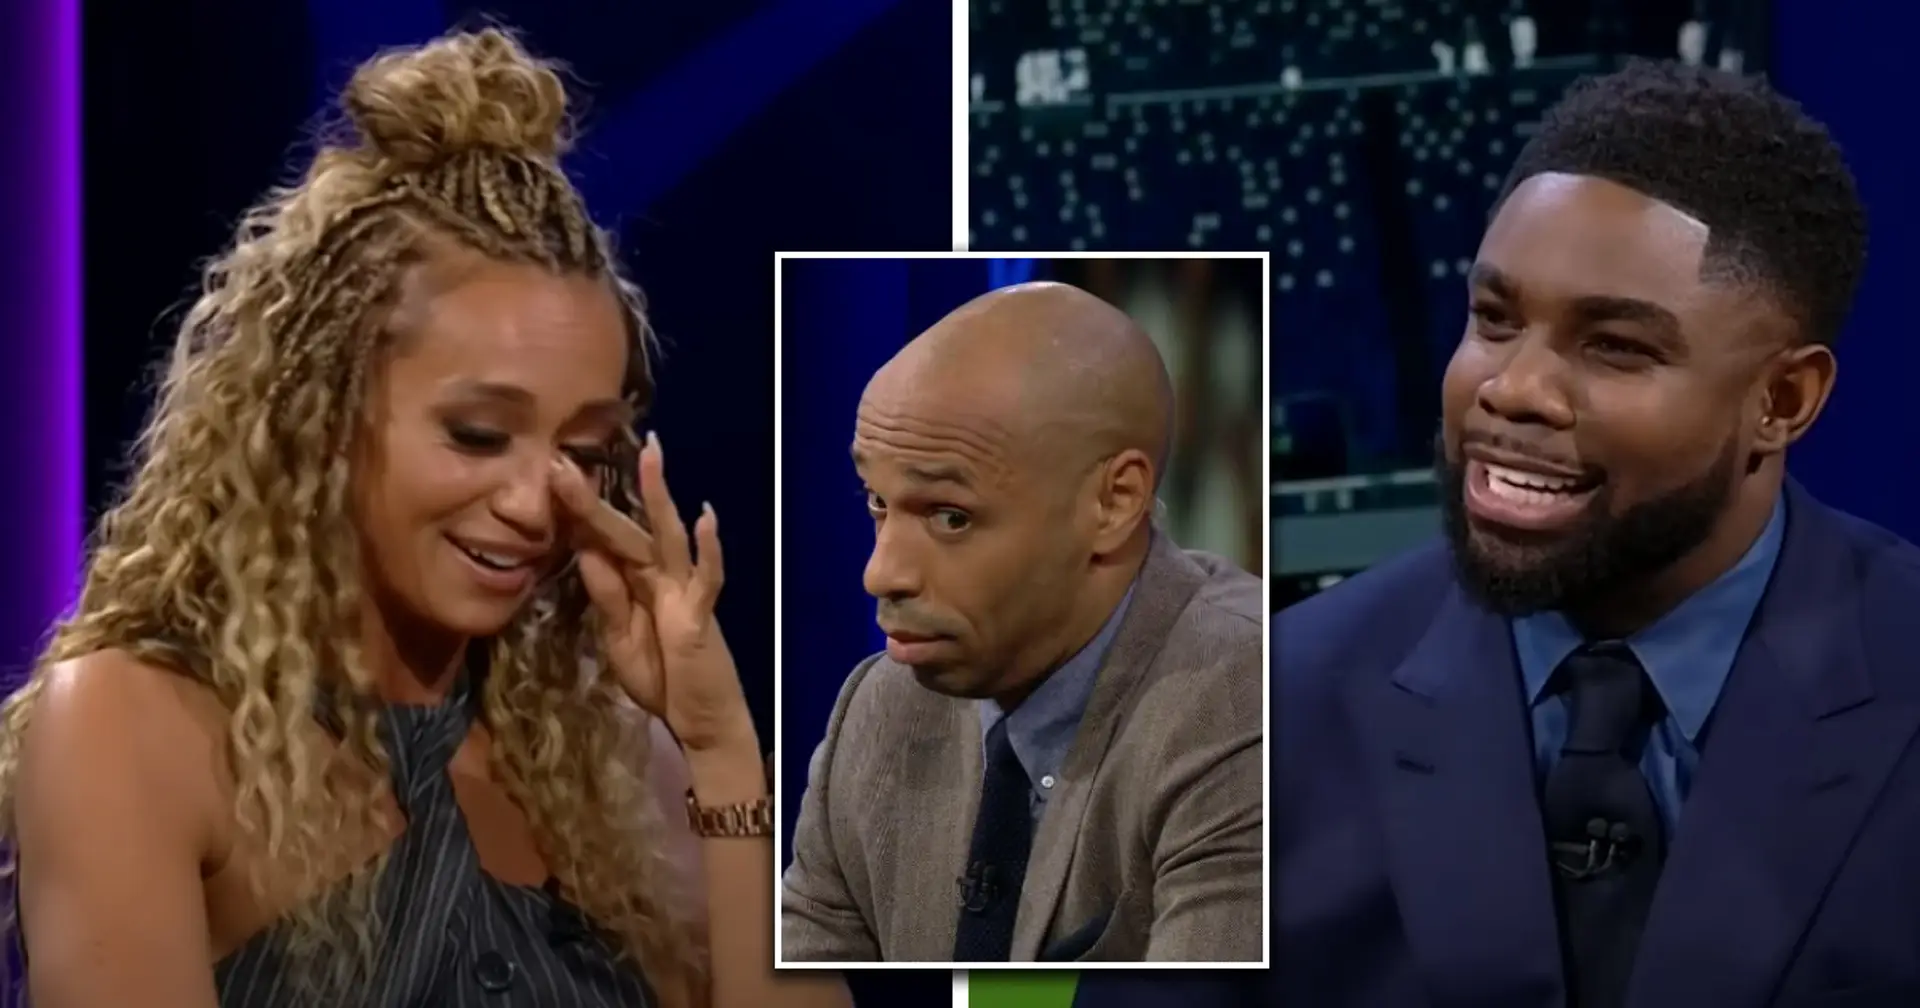 Who is Kate Abdo's mystery partner?